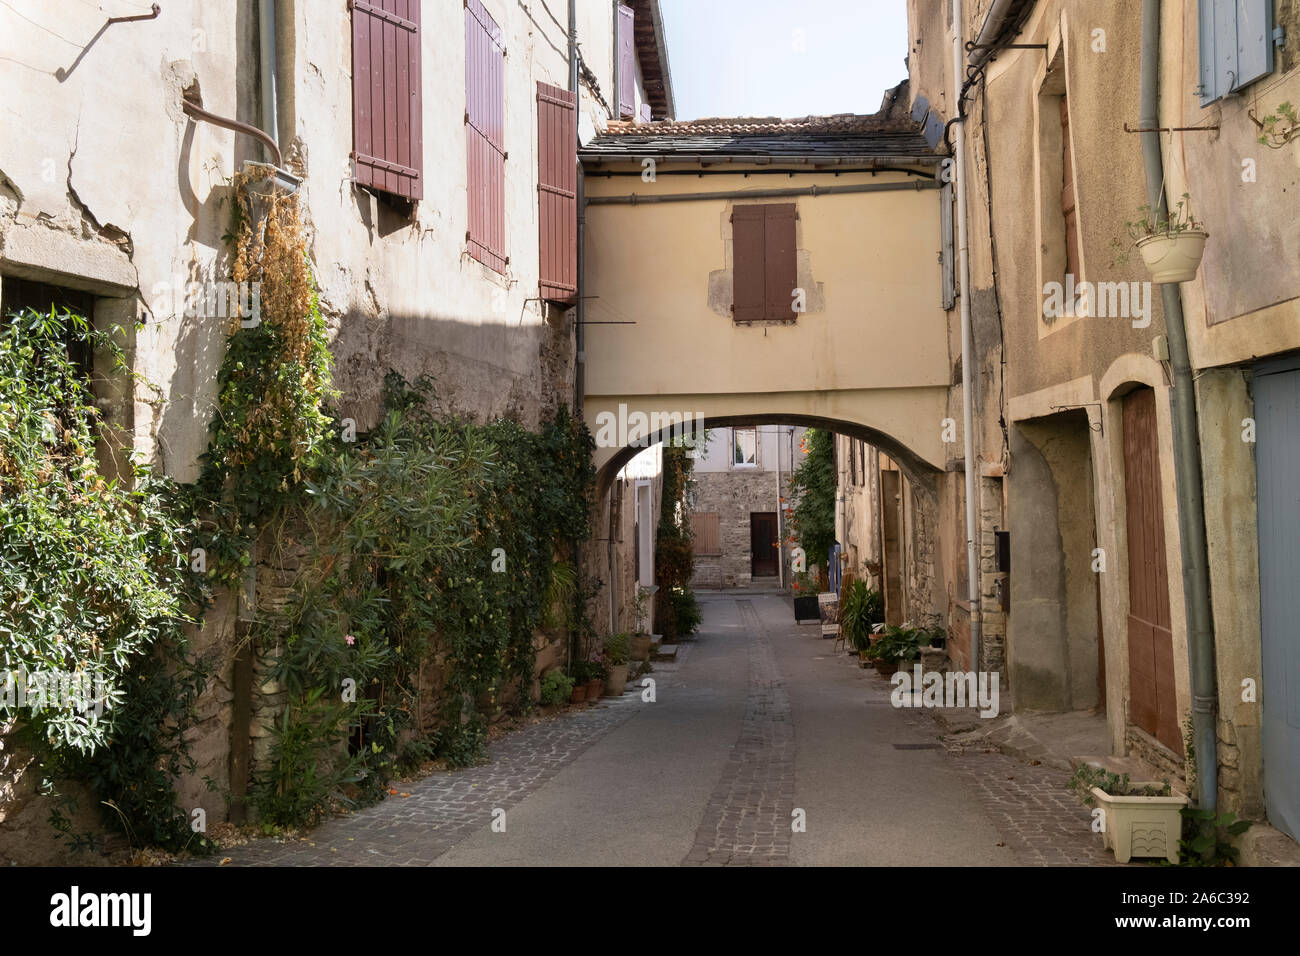 Medieval street in Olargues, Herault, France Stock Photo